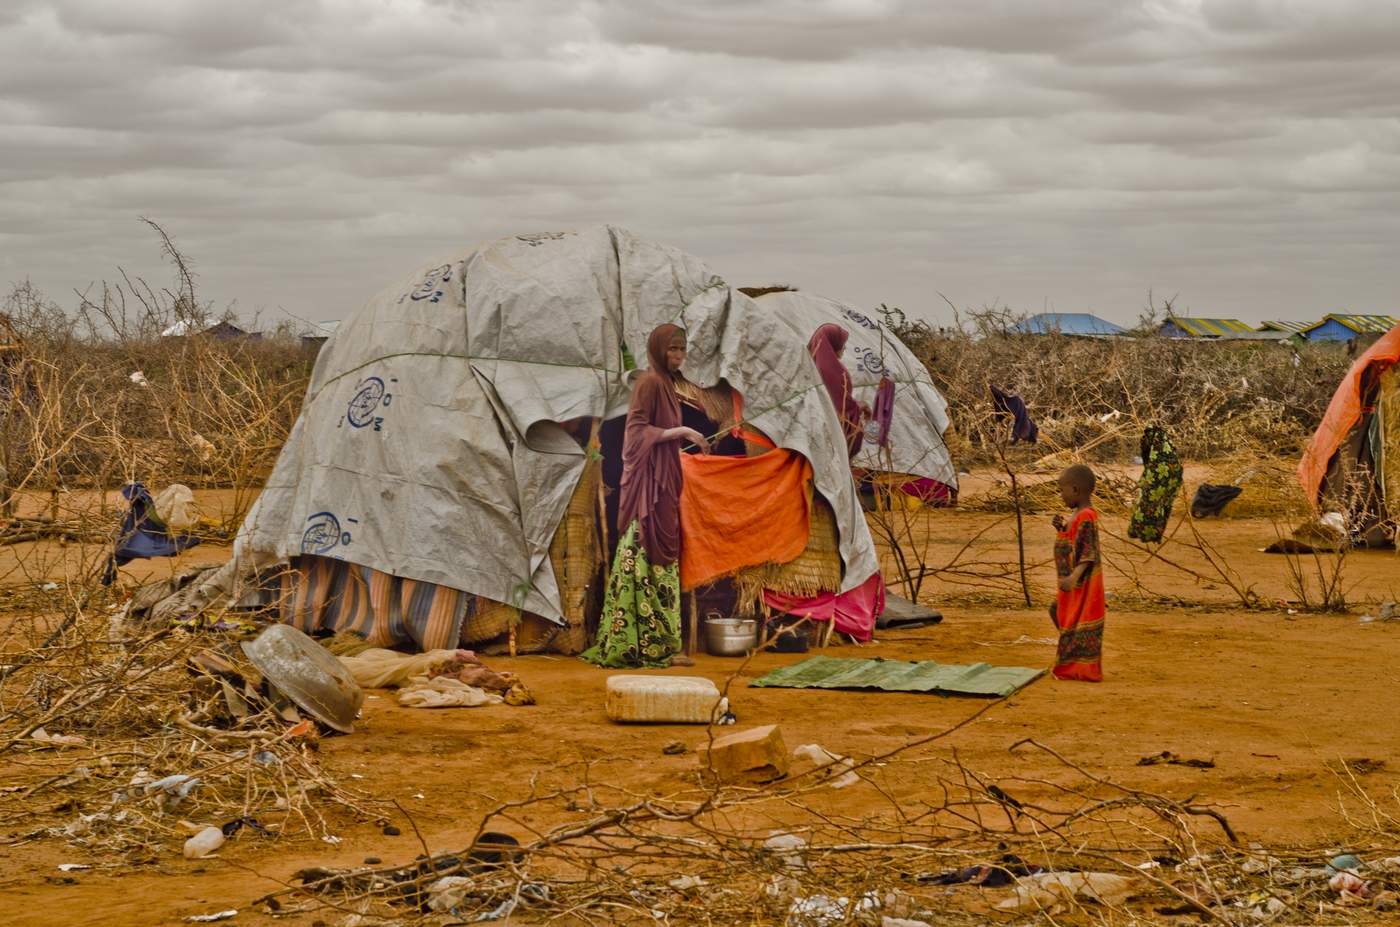 Mother beckoning her child to enter their shelter made of wood and plastic sheeting in Airstrip Area Displacement Site, Dolo Ado, Somali Region. Photo: Rikka Tupaz\/UN Migration Agency (IOM) 2017